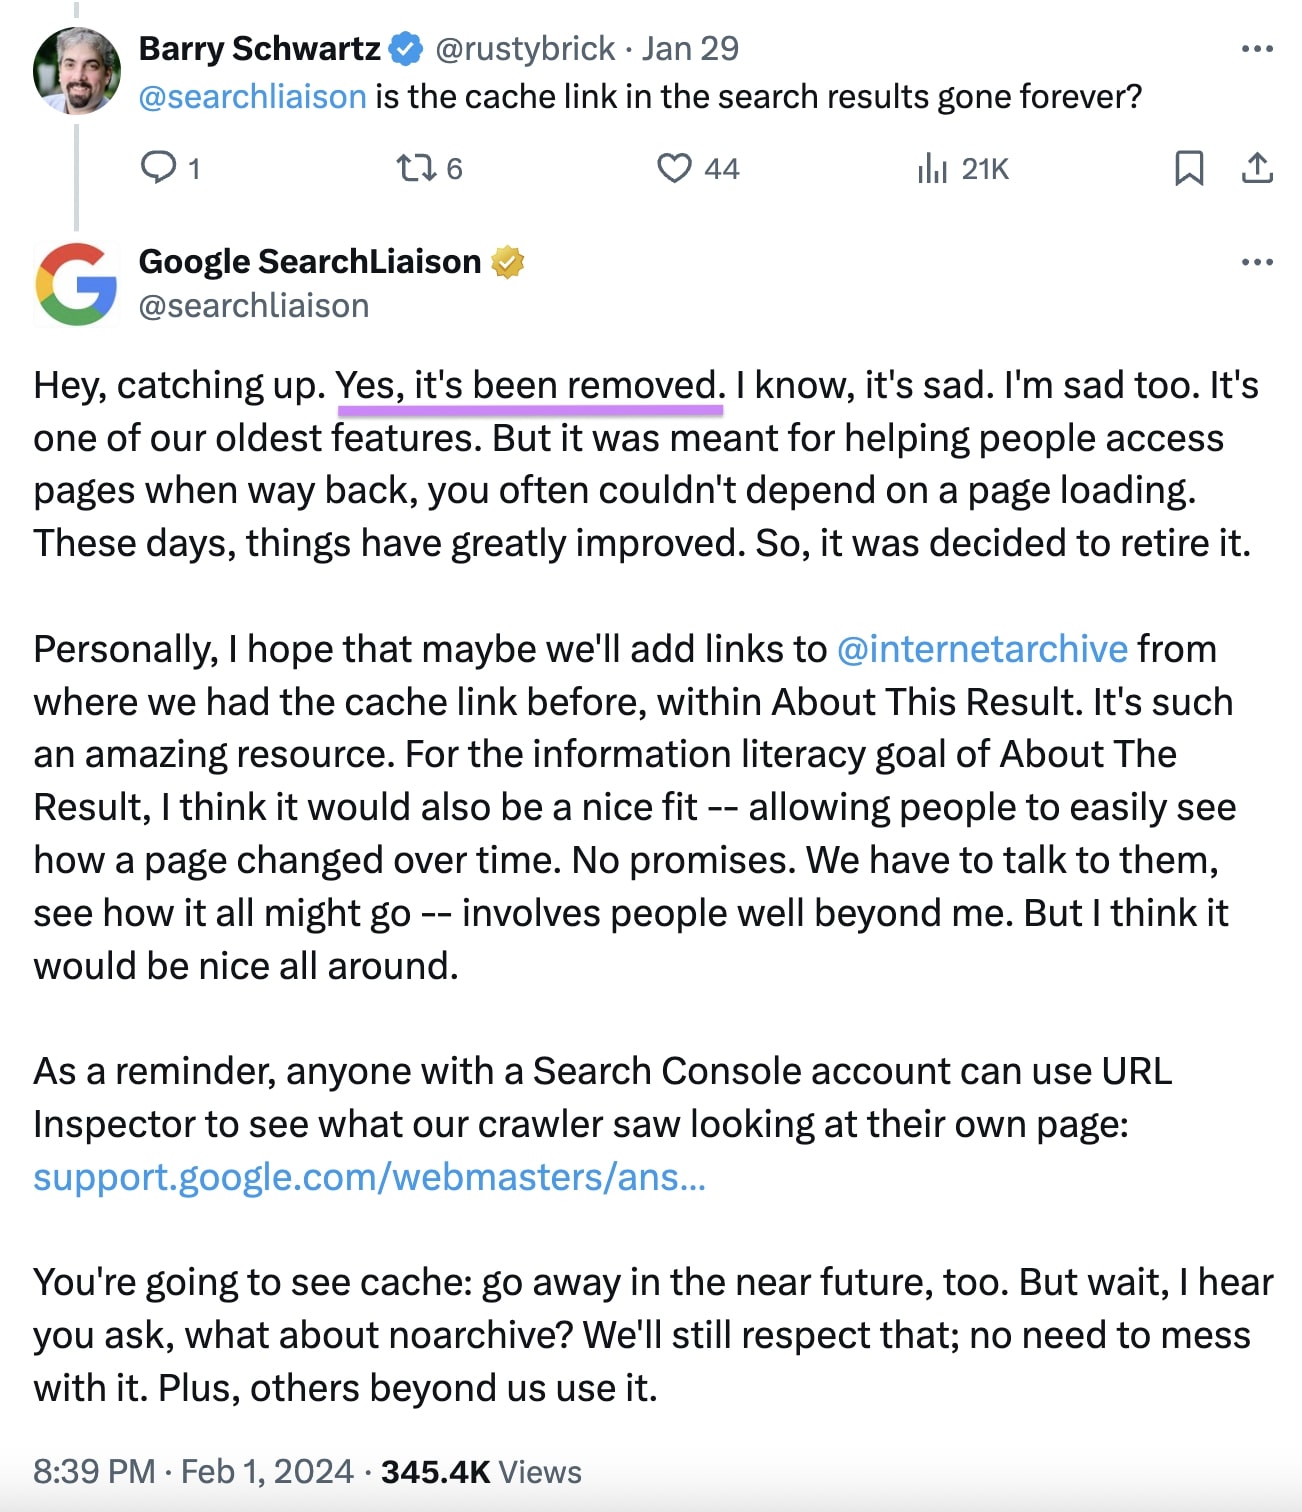 Google Search Liaison's station  connected  X confirming that the hunt  motor  had removed the “Cached” links from its SERPs